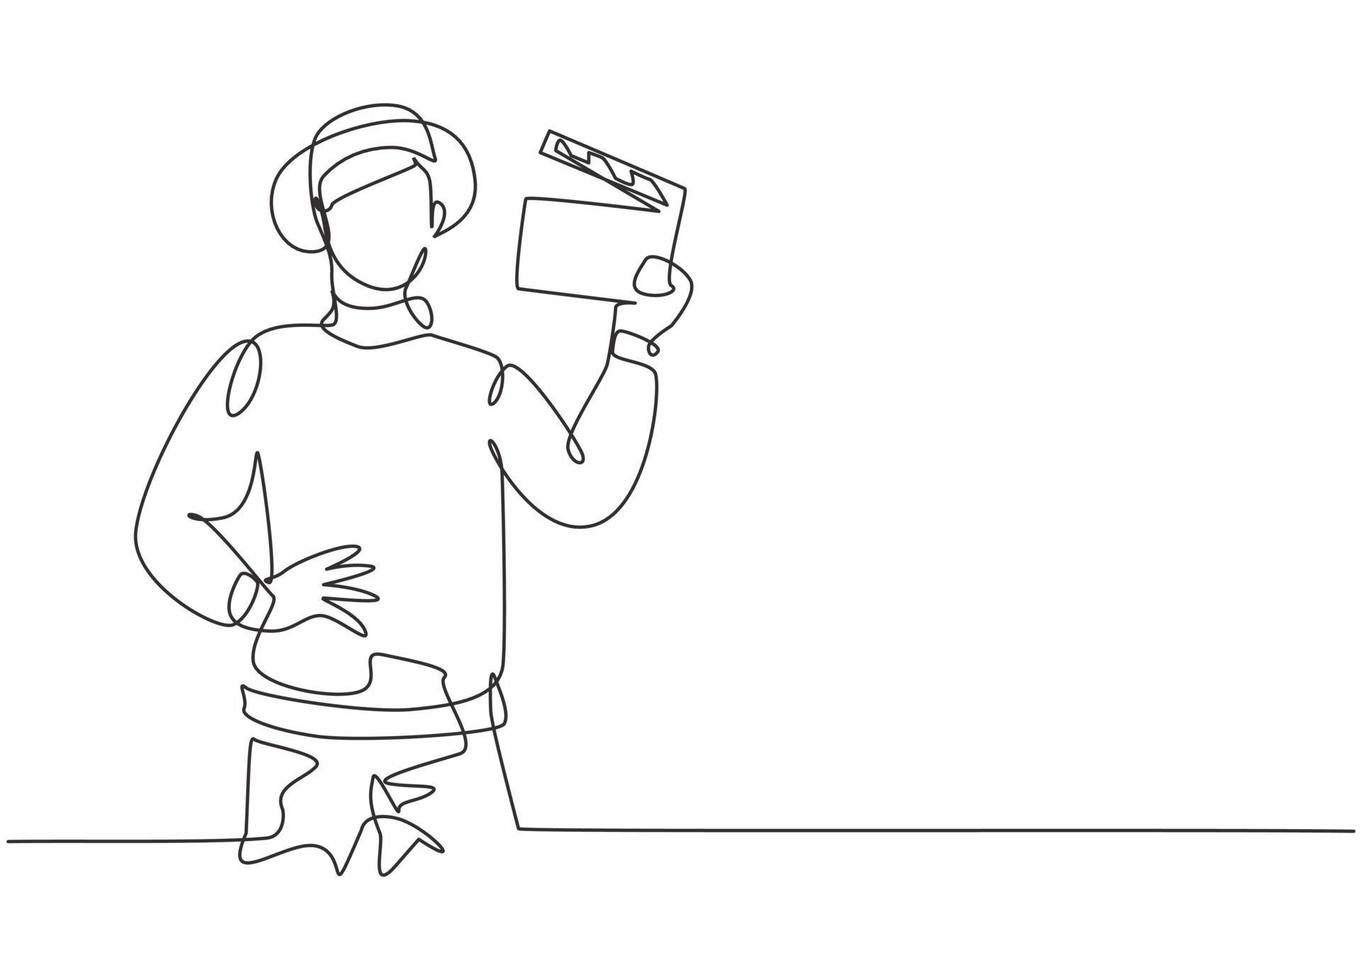 Single one line drawing of young smart male film director holding clapperboard. Professional work profession and occupation minimal concept. Continuous line draw design graphic vector illustration